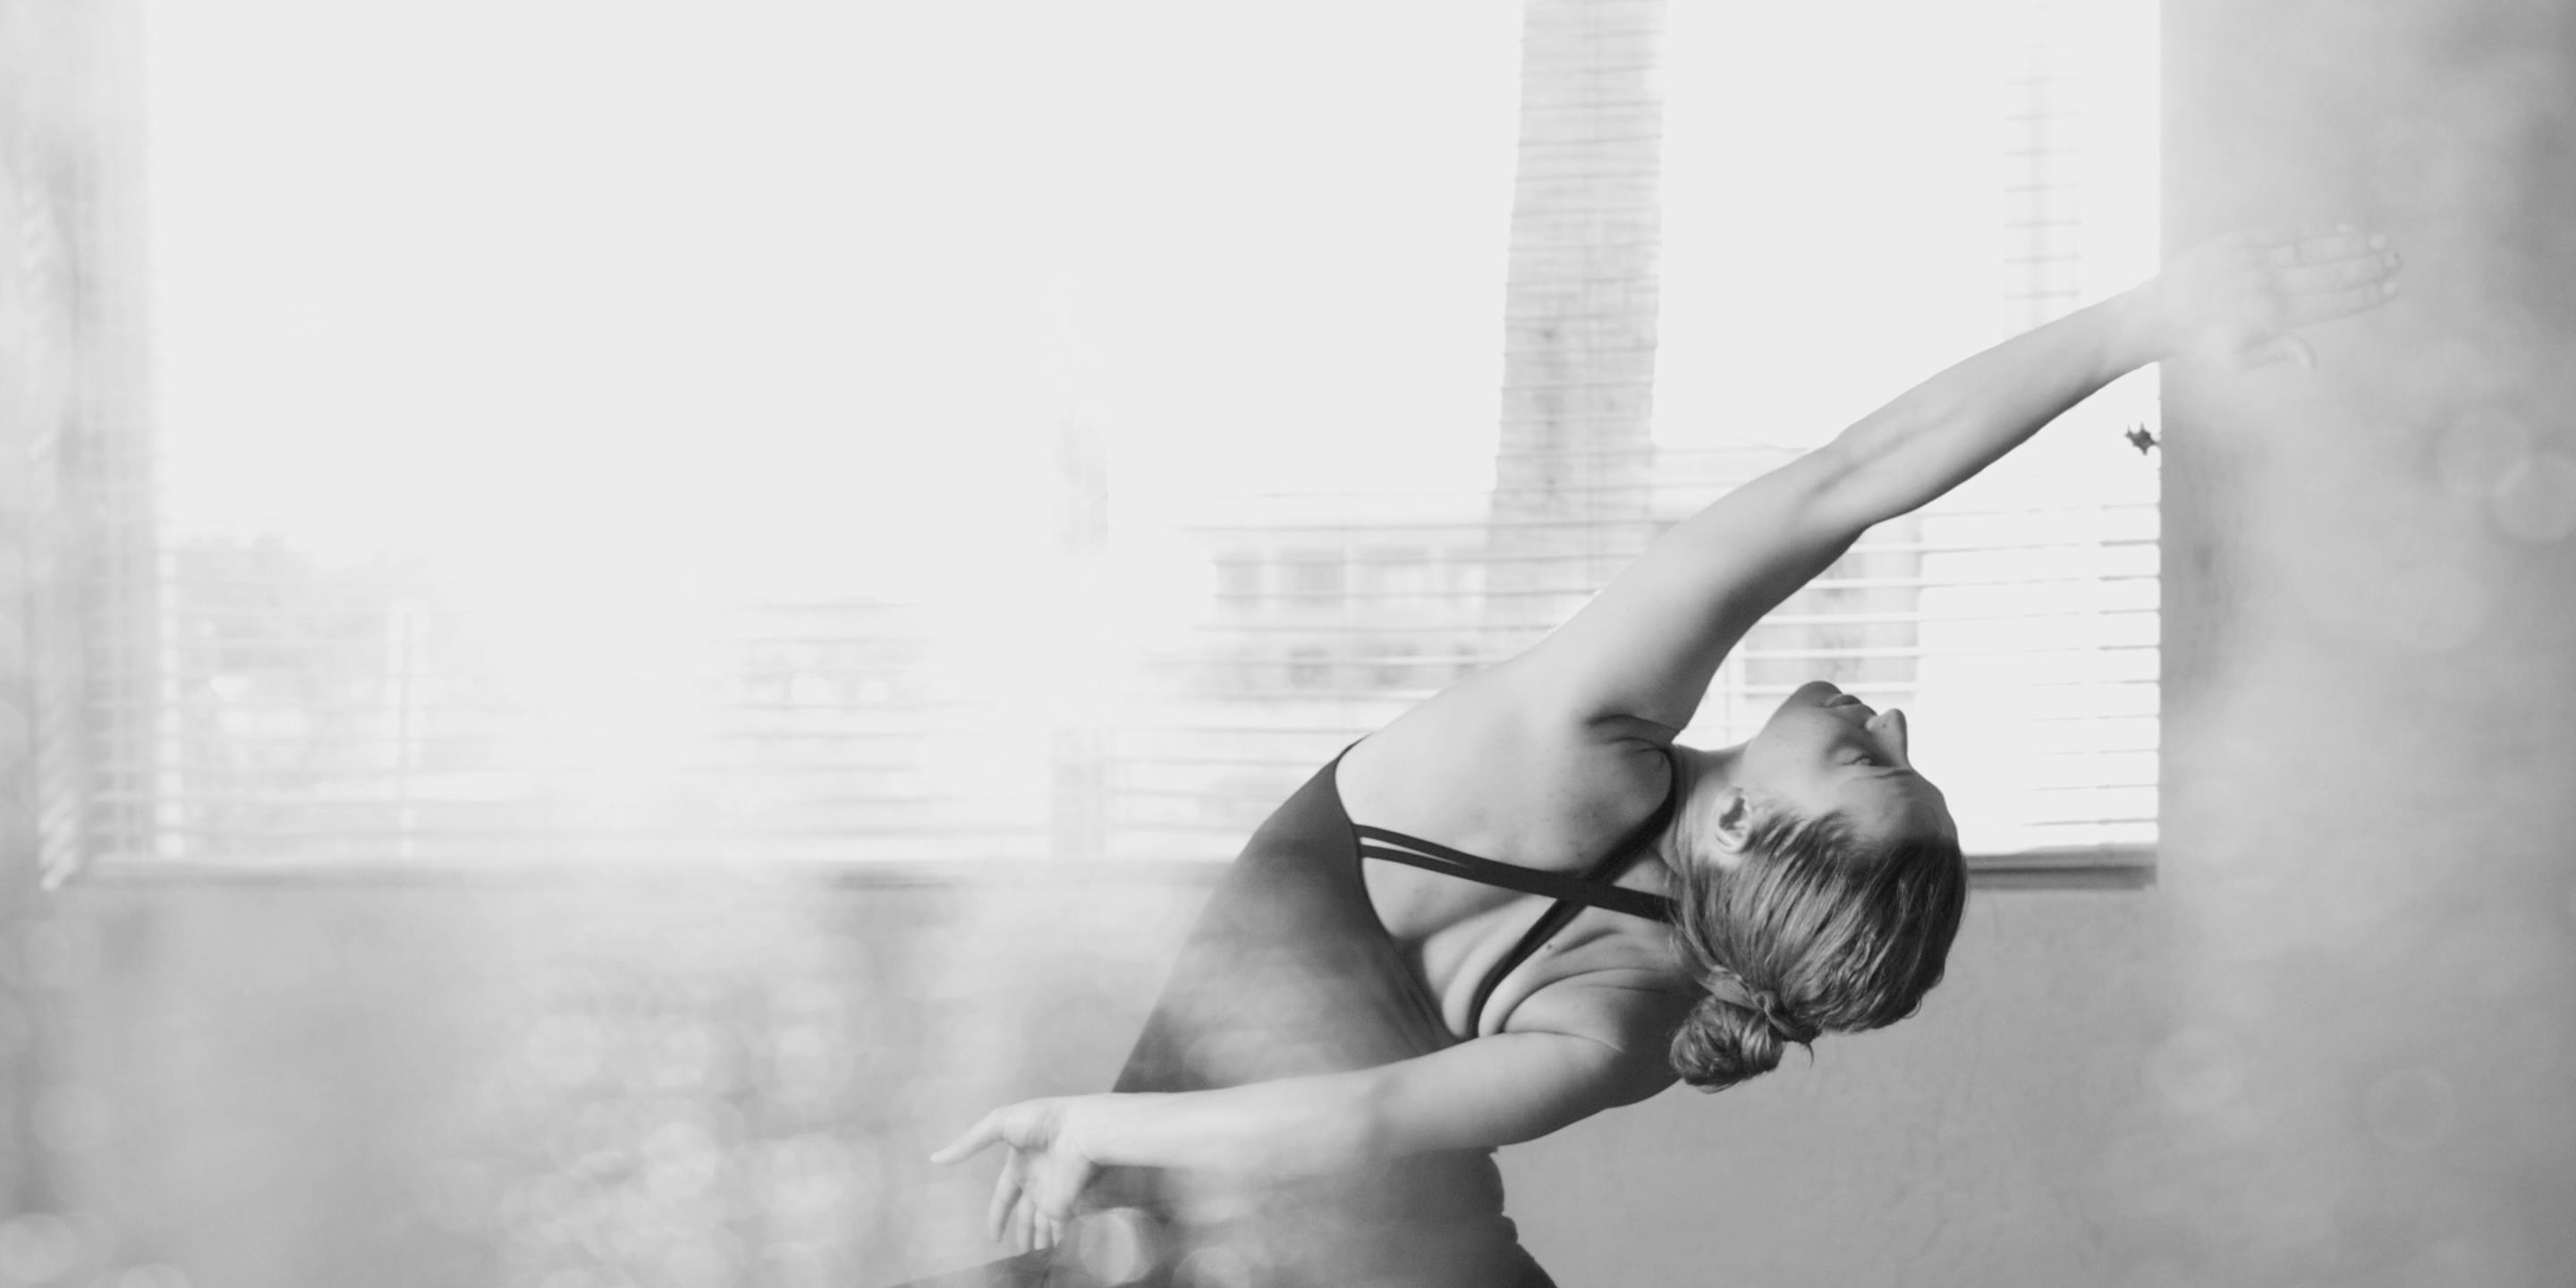 Hot yoga − does it help and how? - Skill Yoga